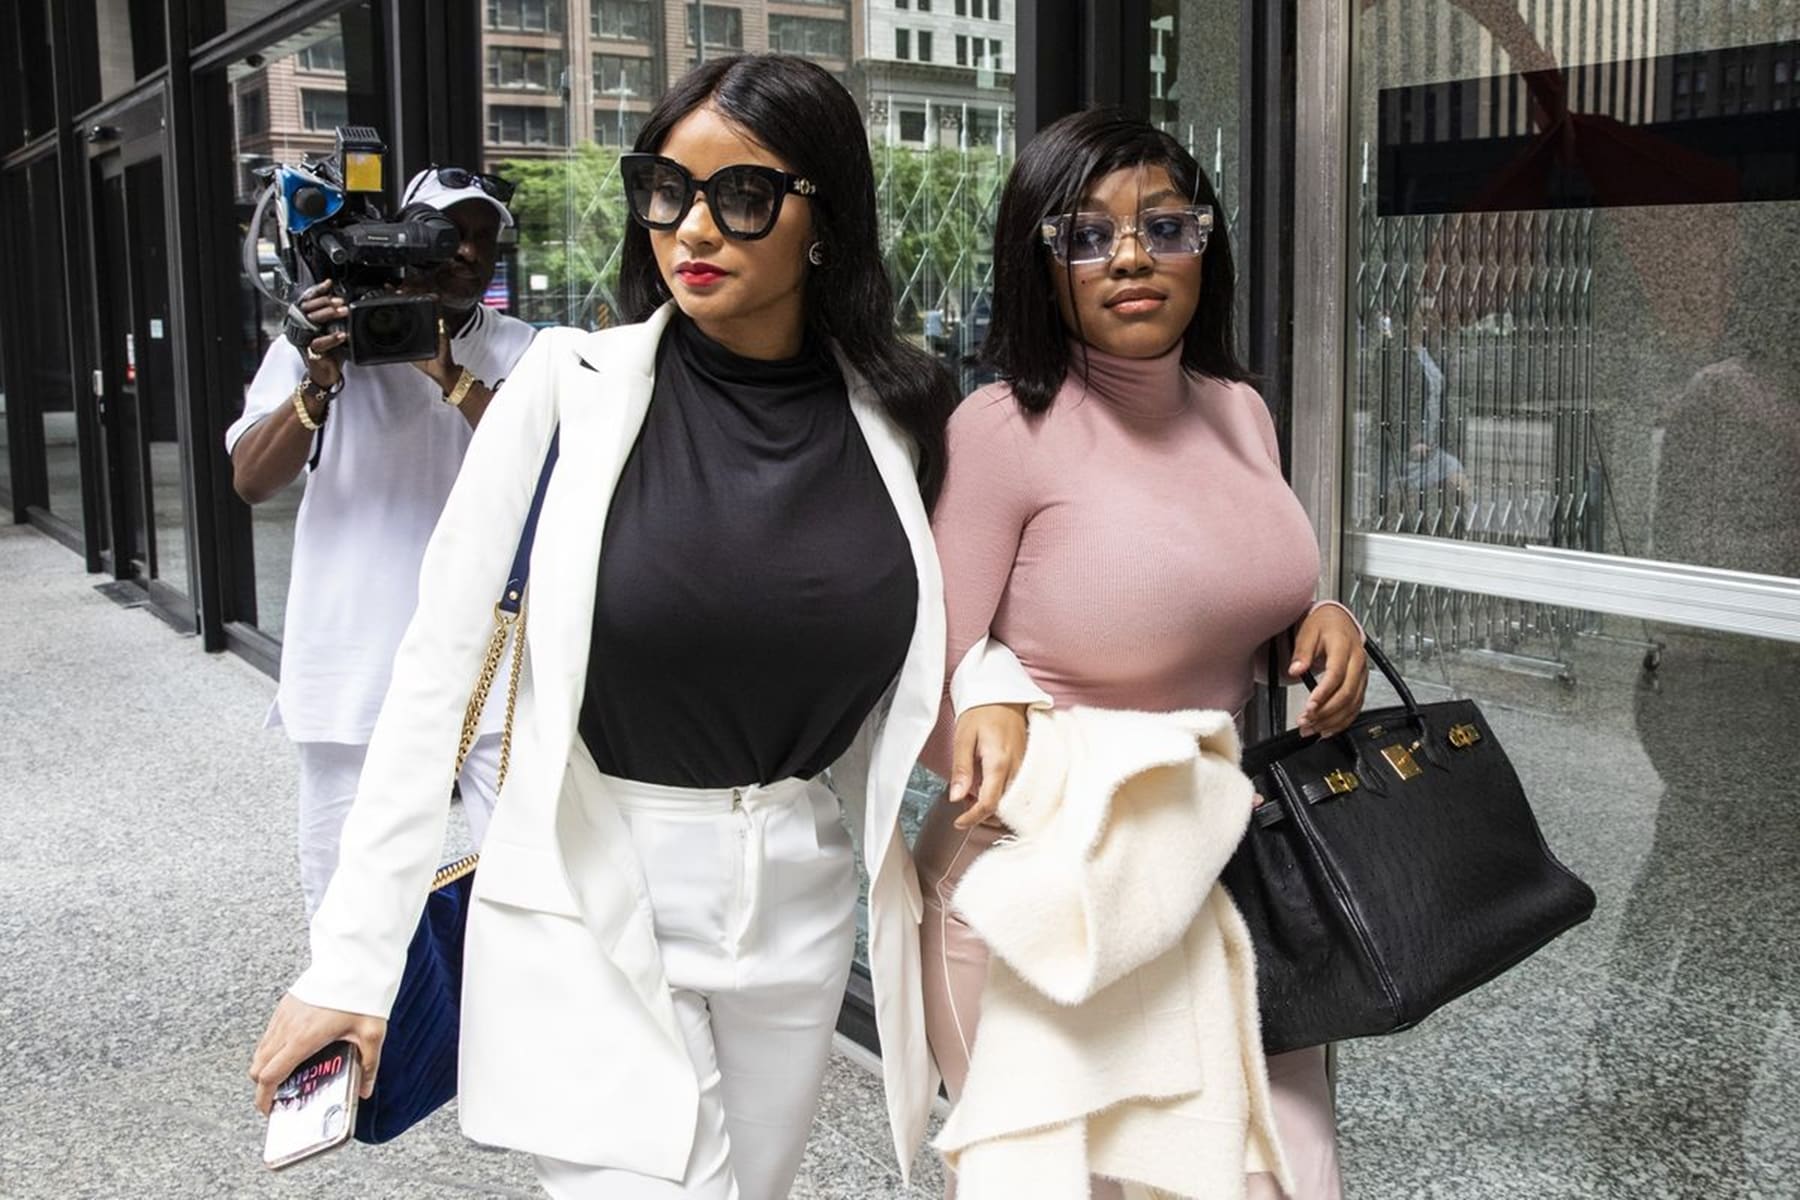 R. Kelly’s Girlfriends — Azriel Clary And Joycelyn Savage’s Expensive ...